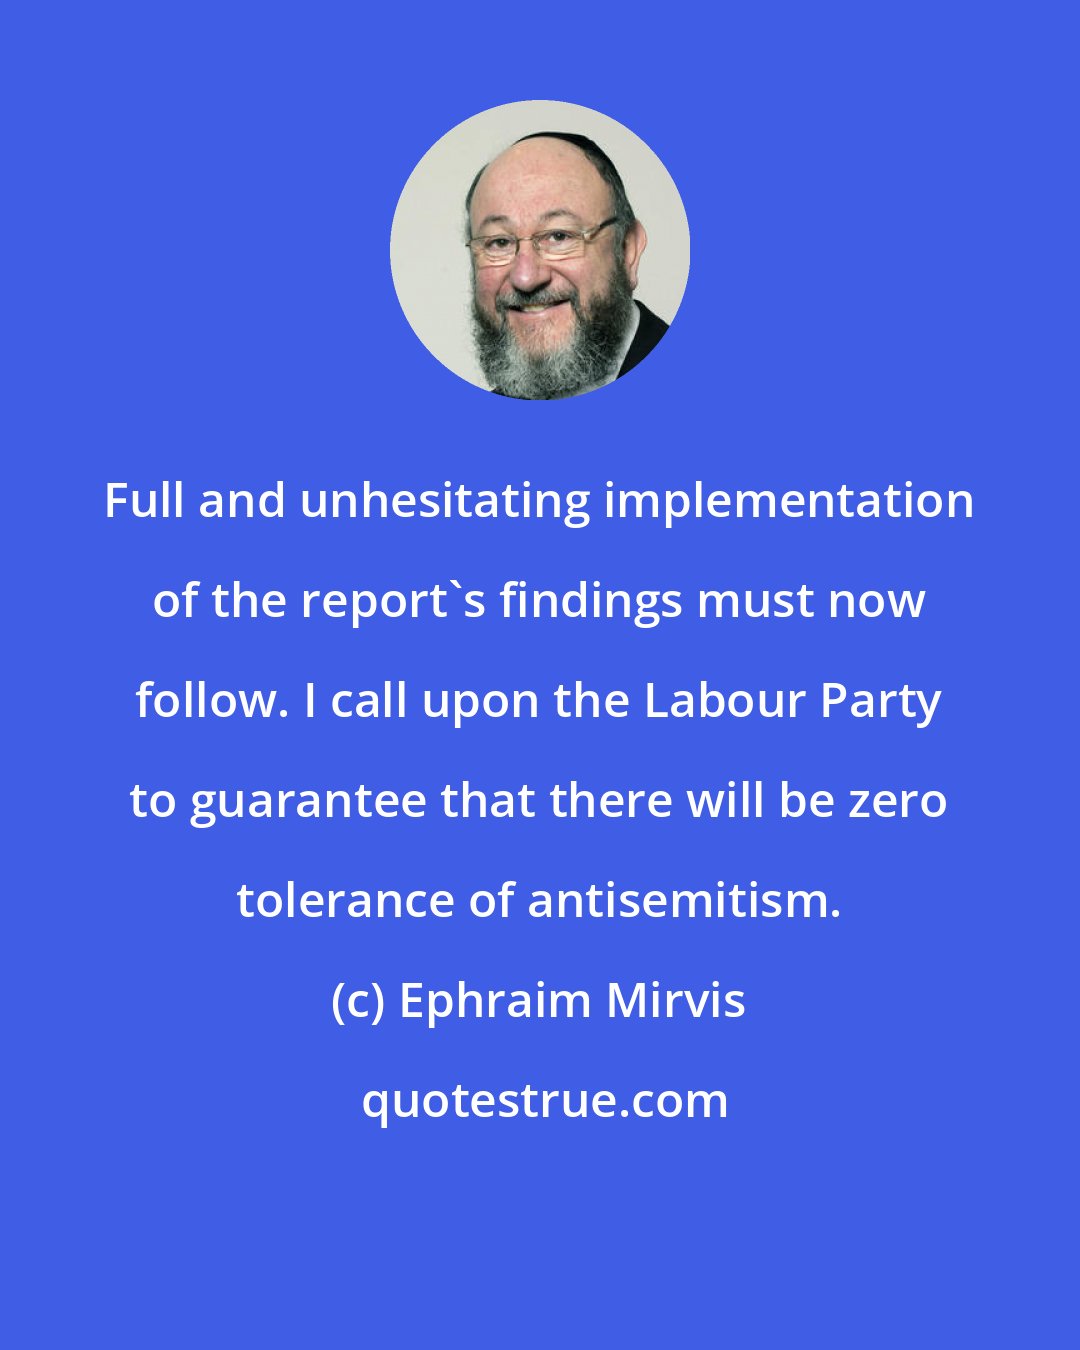 Ephraim Mirvis: Full and unhesitating implementation of the report's findings must now follow. I call upon the Labour Party to guarantee that there will be zero tolerance of antisemitism.